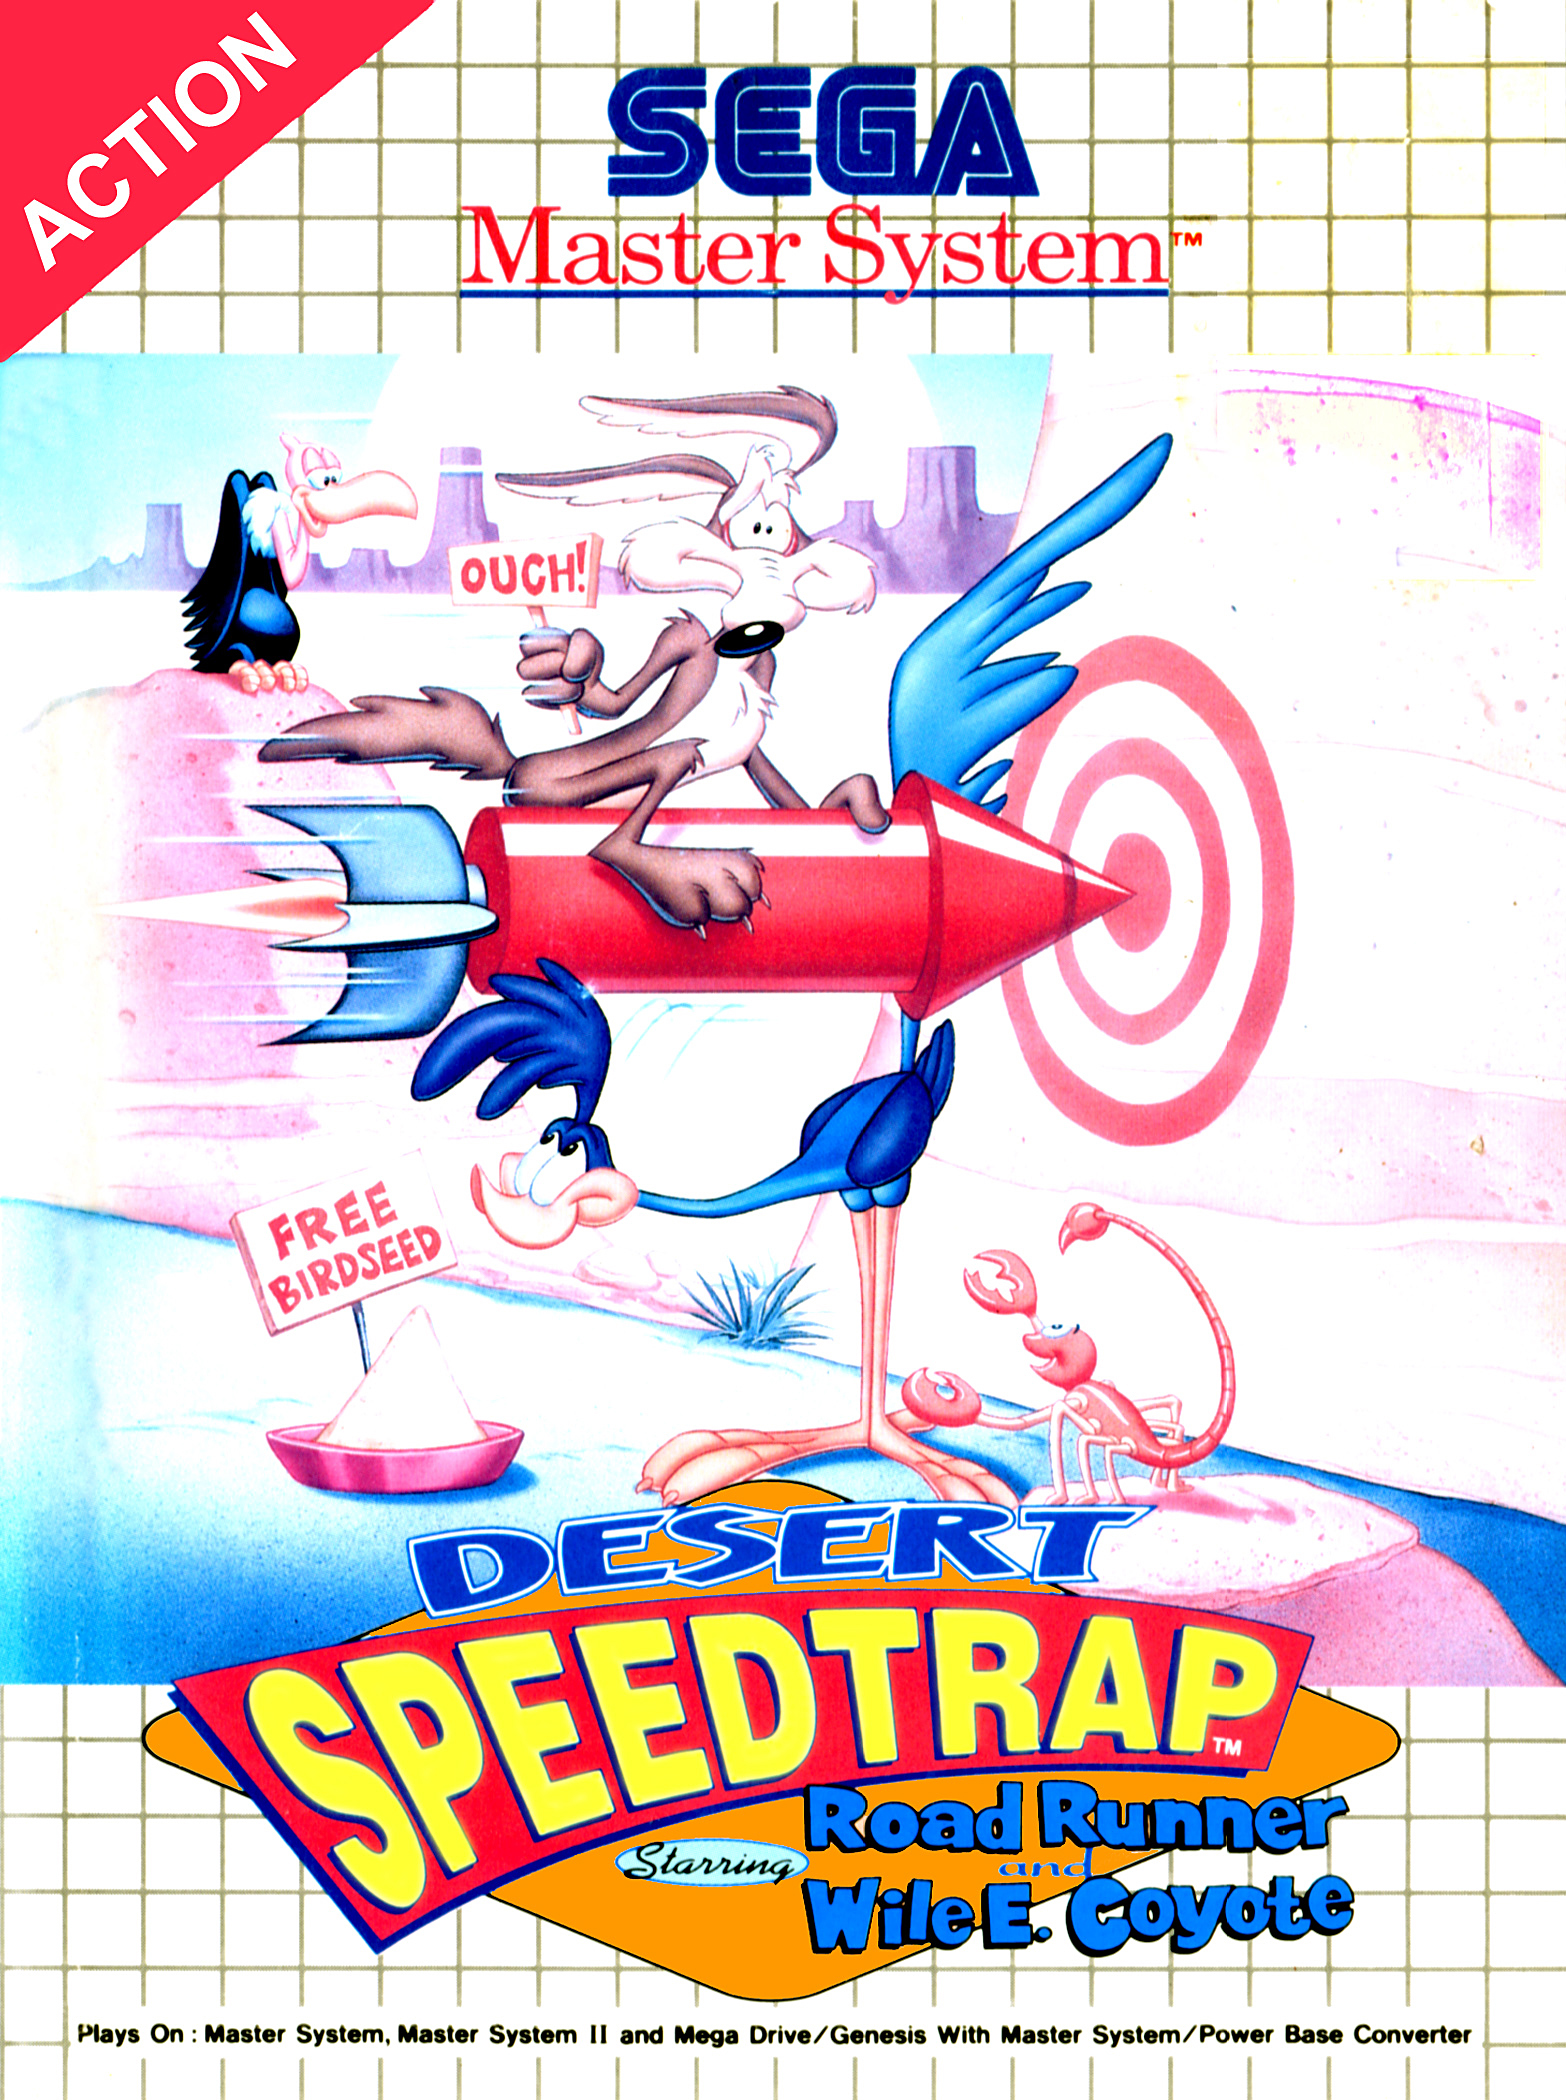 Desert Speedtrap starring Road Runner and Wile E. Coyote Picture